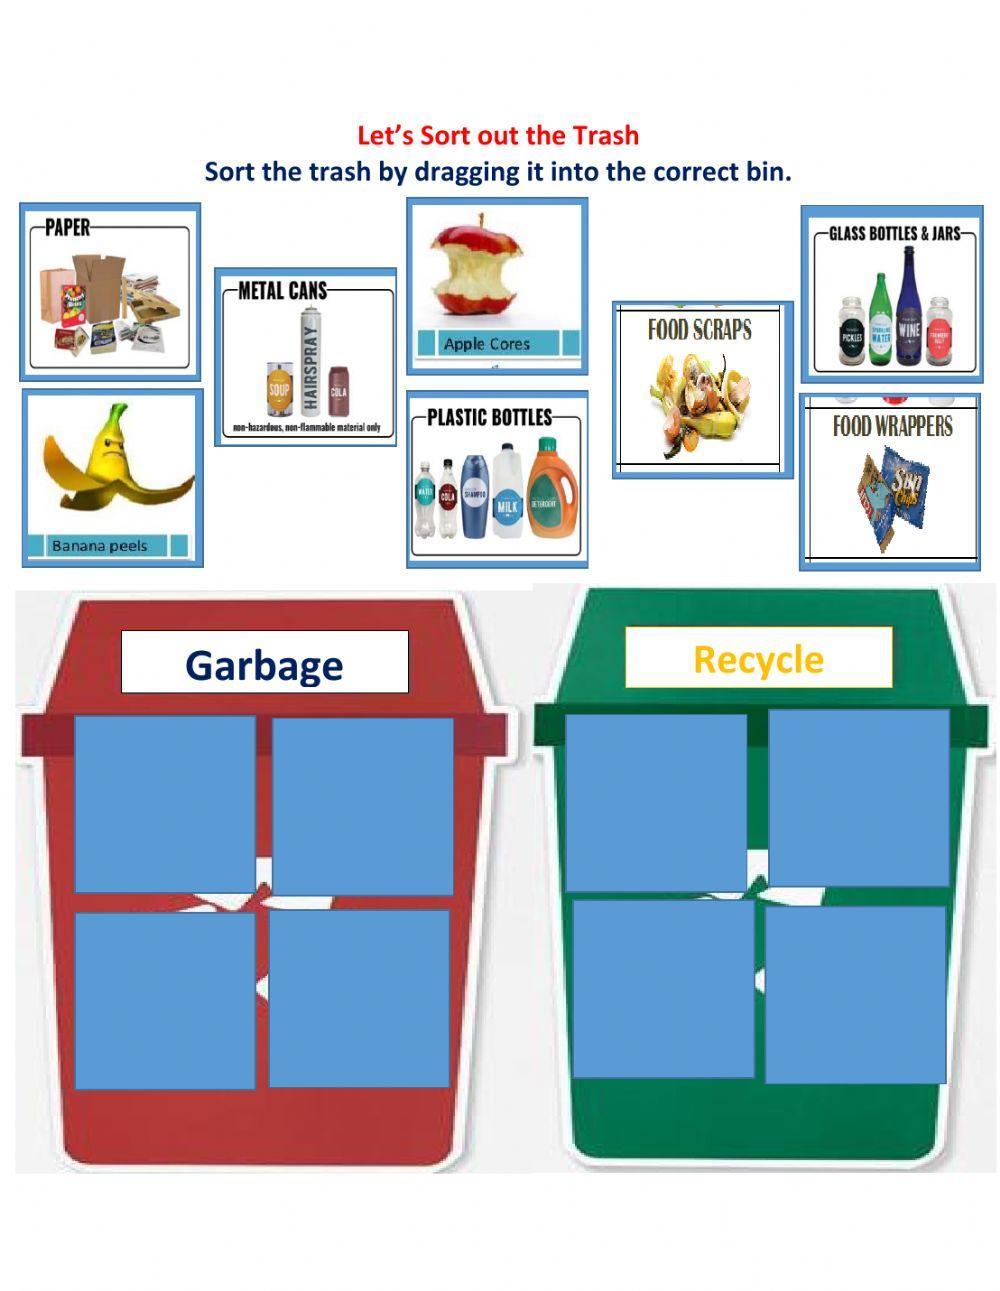 Trash receptacles, recycle